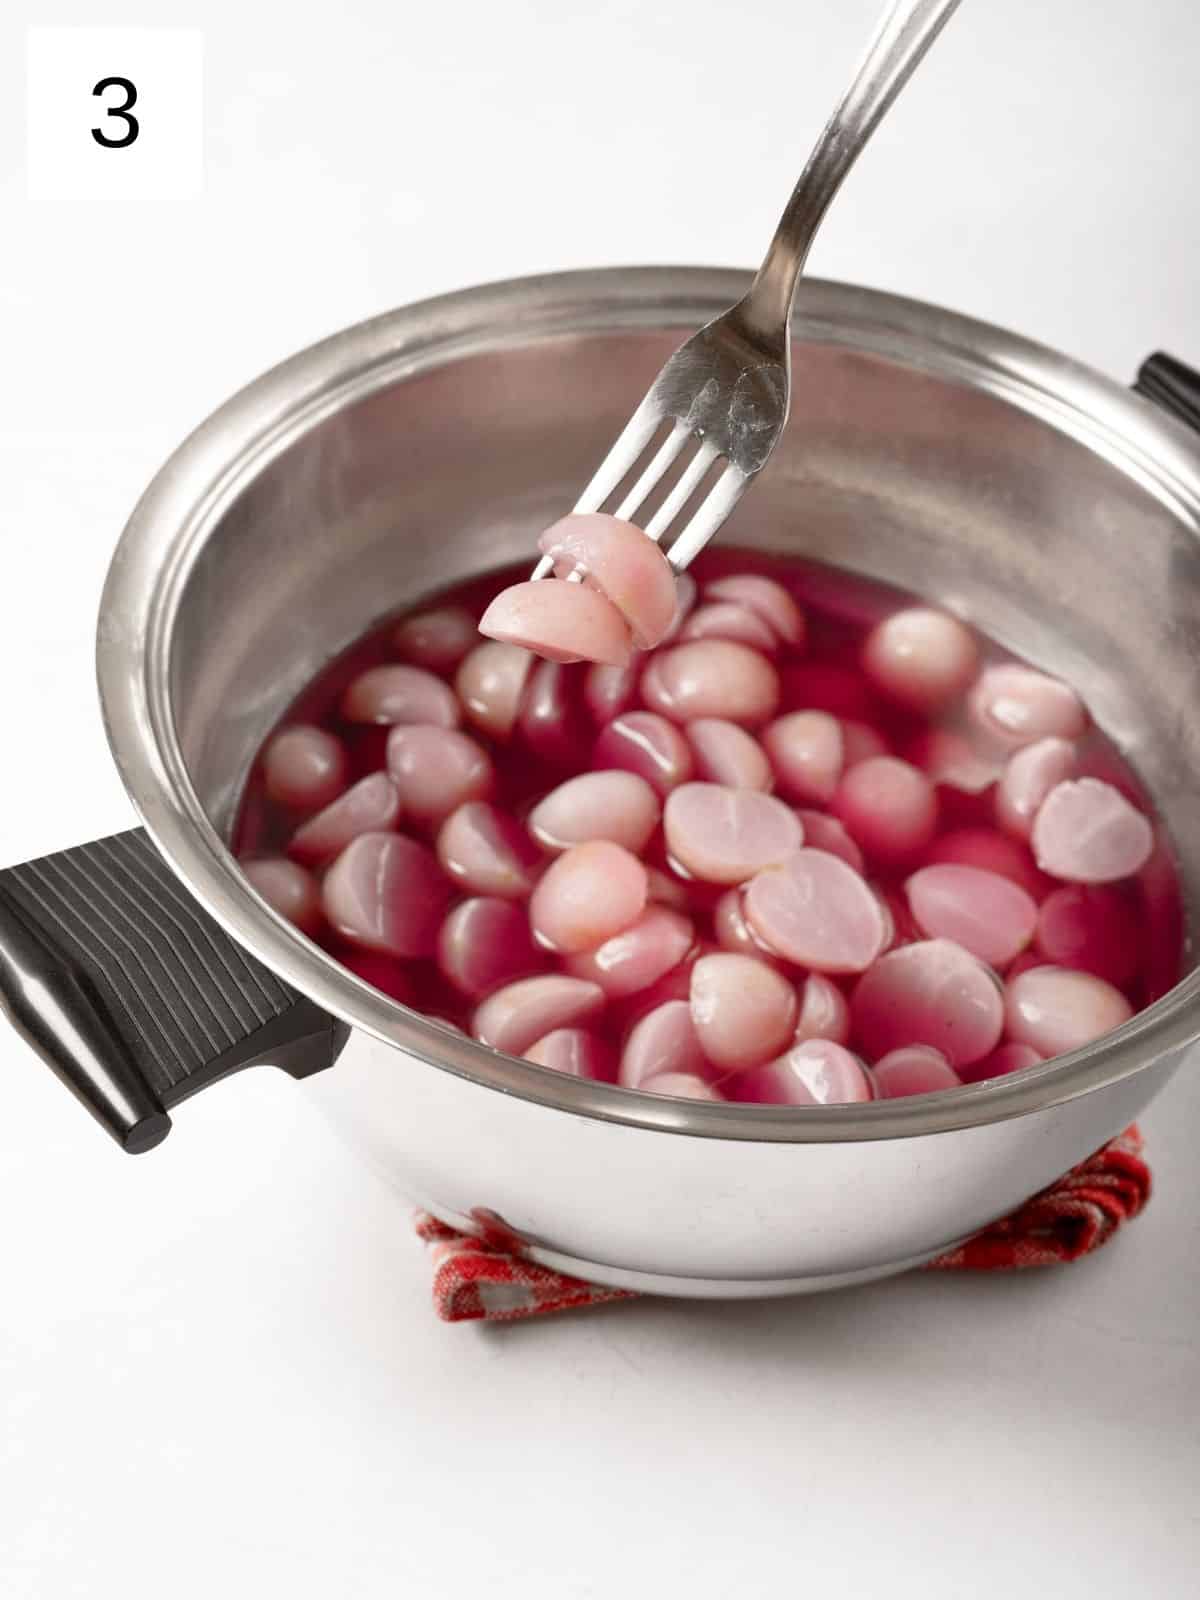 tender radish halves in a pot of simmered water.